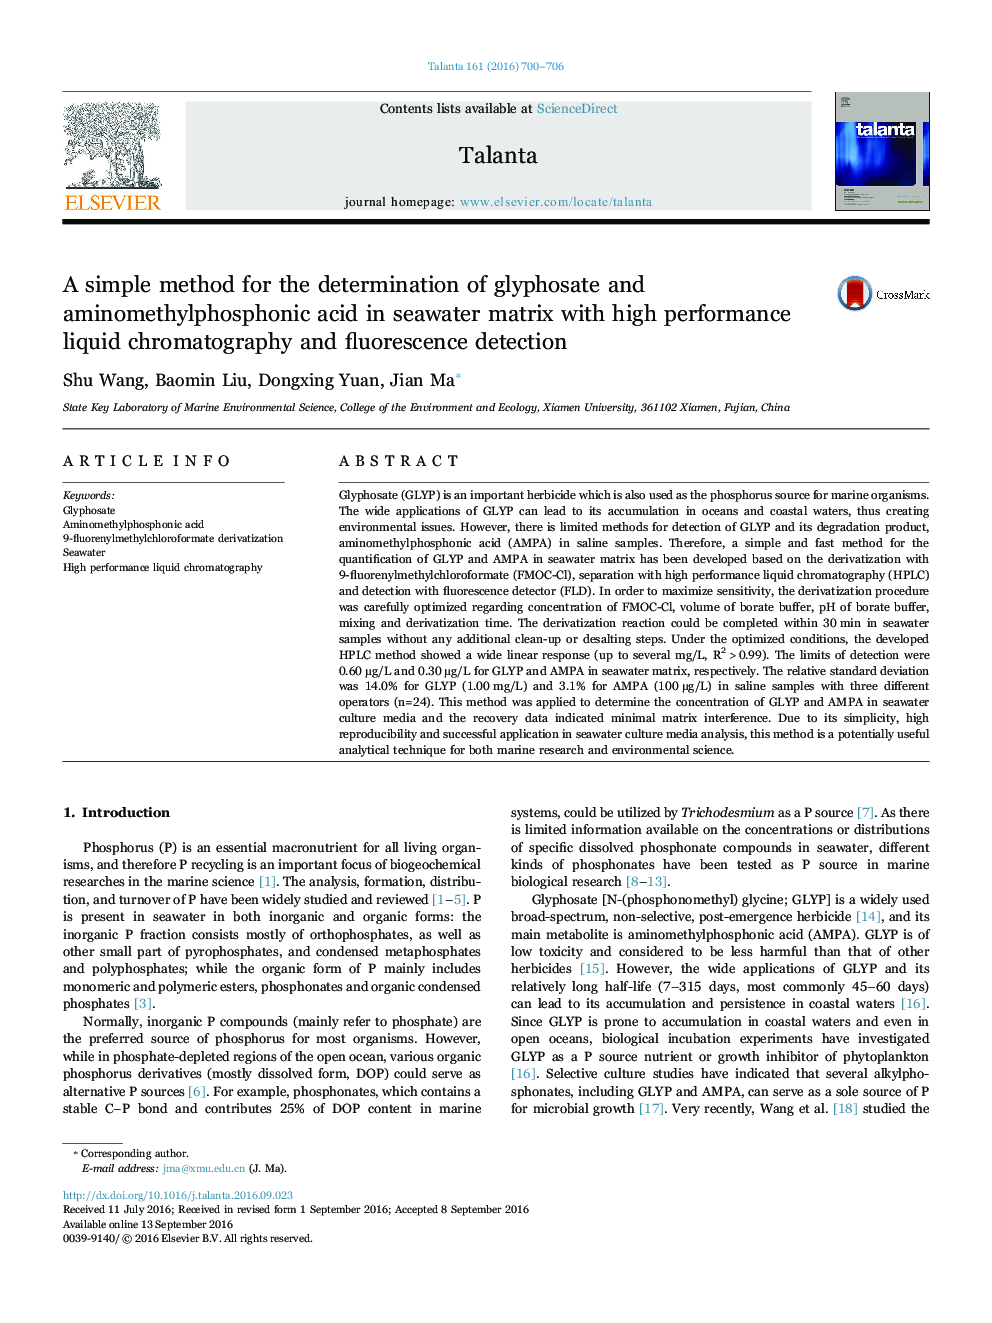 A simple method for the determination of glyphosate and aminomethylphosphonic acid in seawater matrix with high performance liquid chromatography and fluorescence detection